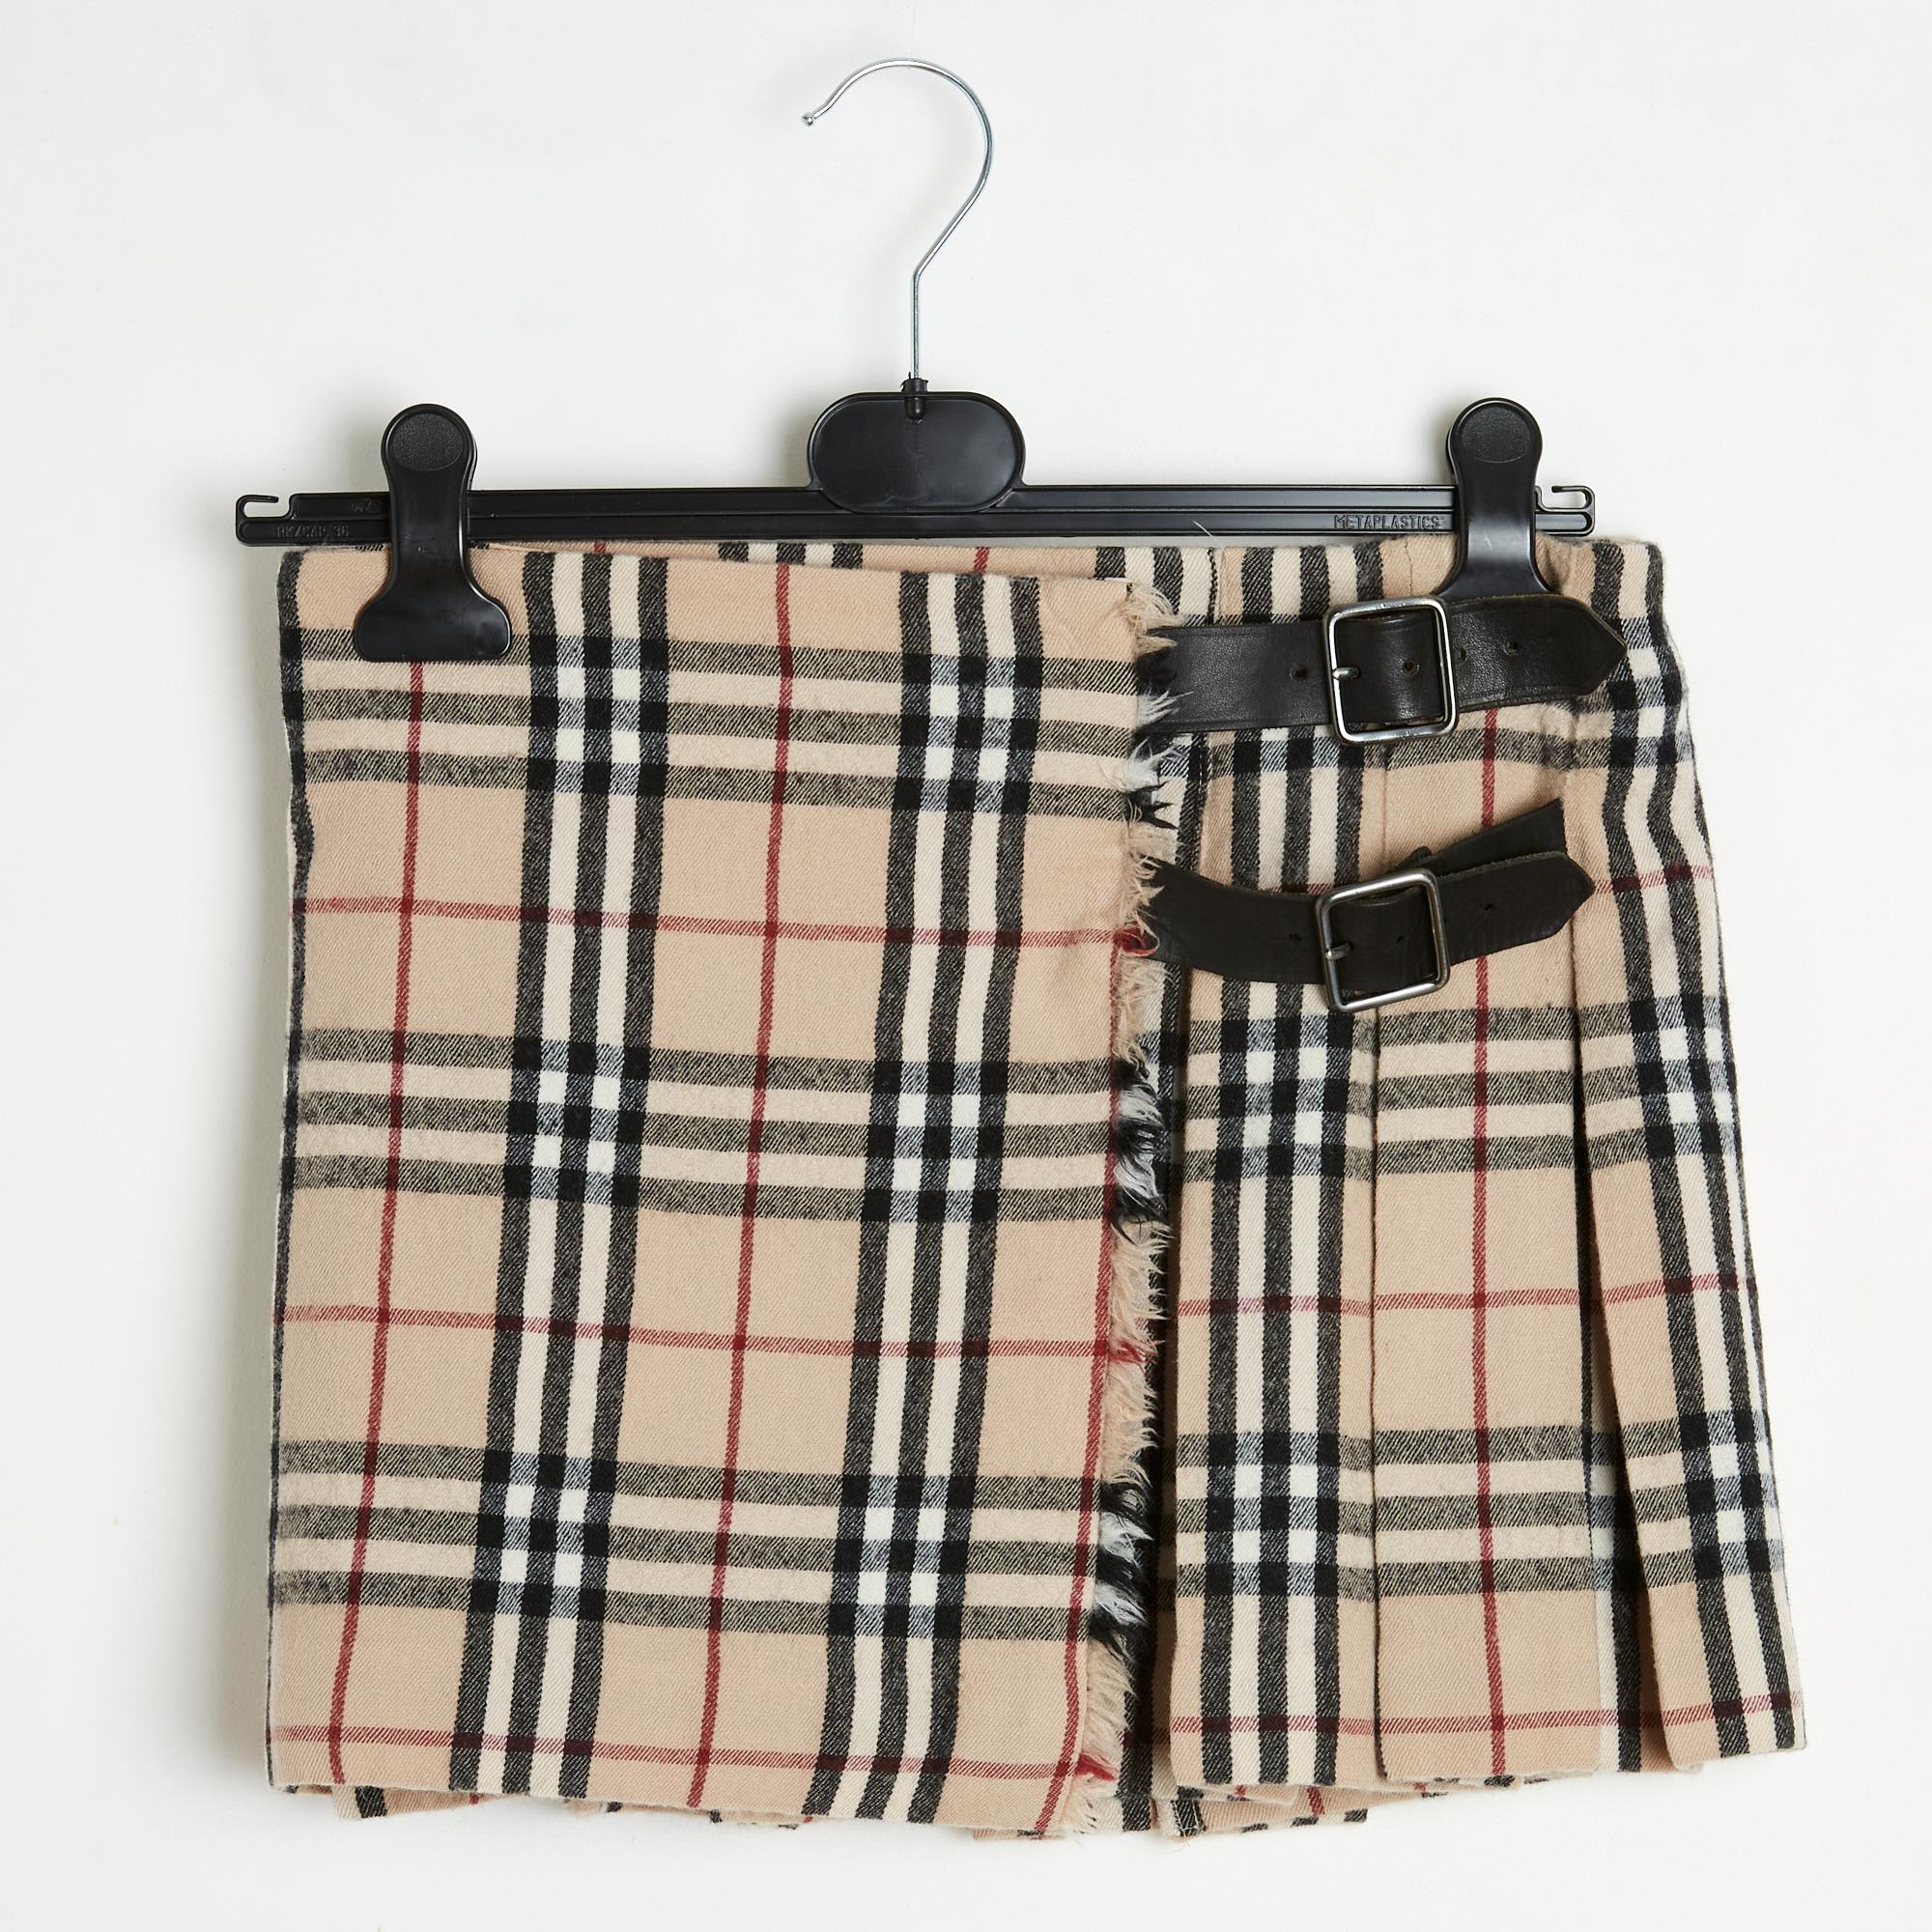 Burberry kilt-style skirt, mini pleated wool in Scottish pattern or Vintage Check in camel beige, ecru black tones, low waist, adjustable cross closure with two pin buckles on brown leather tab on each side, unlined. Size UK10 or 38FR: waist 38 cm,